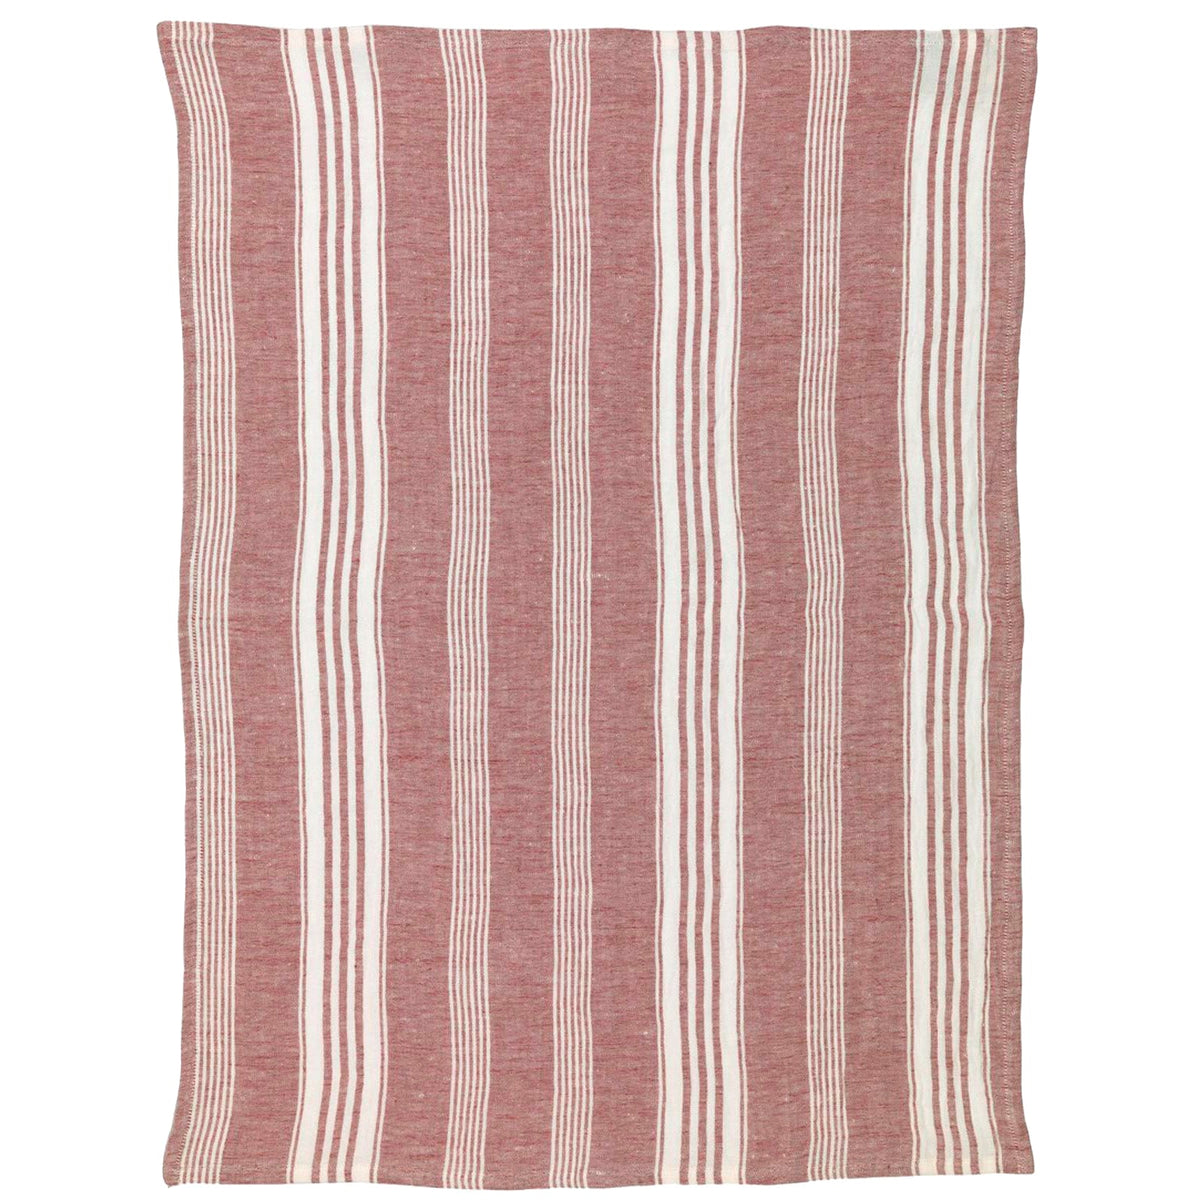 Trattoria Rosso Kitchen Towel Multi Stripes sold as part of a mixed set of 2 in Italian Linen from Caskata